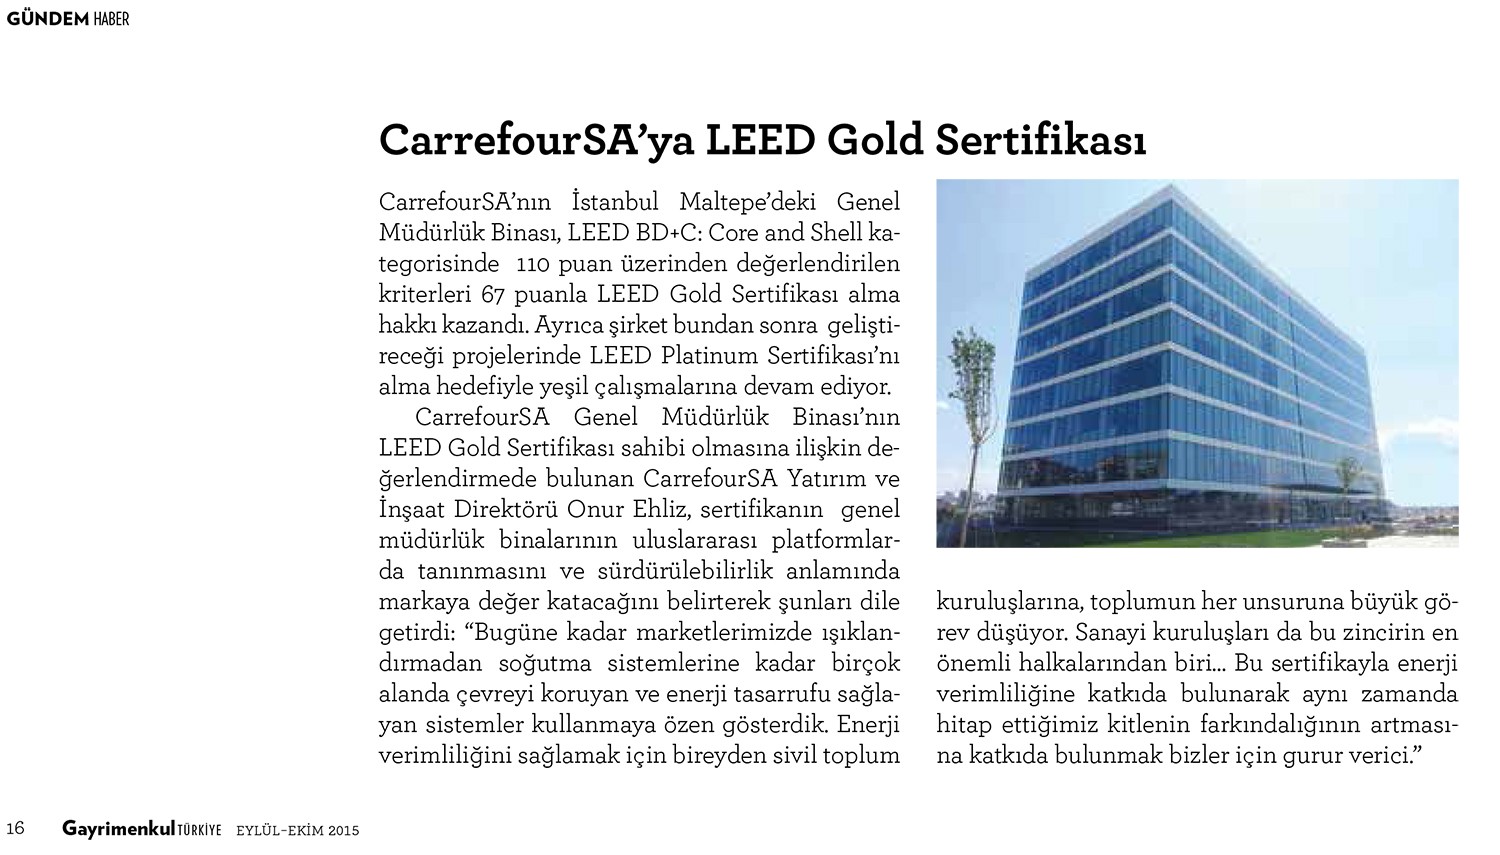 LEED Gold Certificate to CarrefourSA